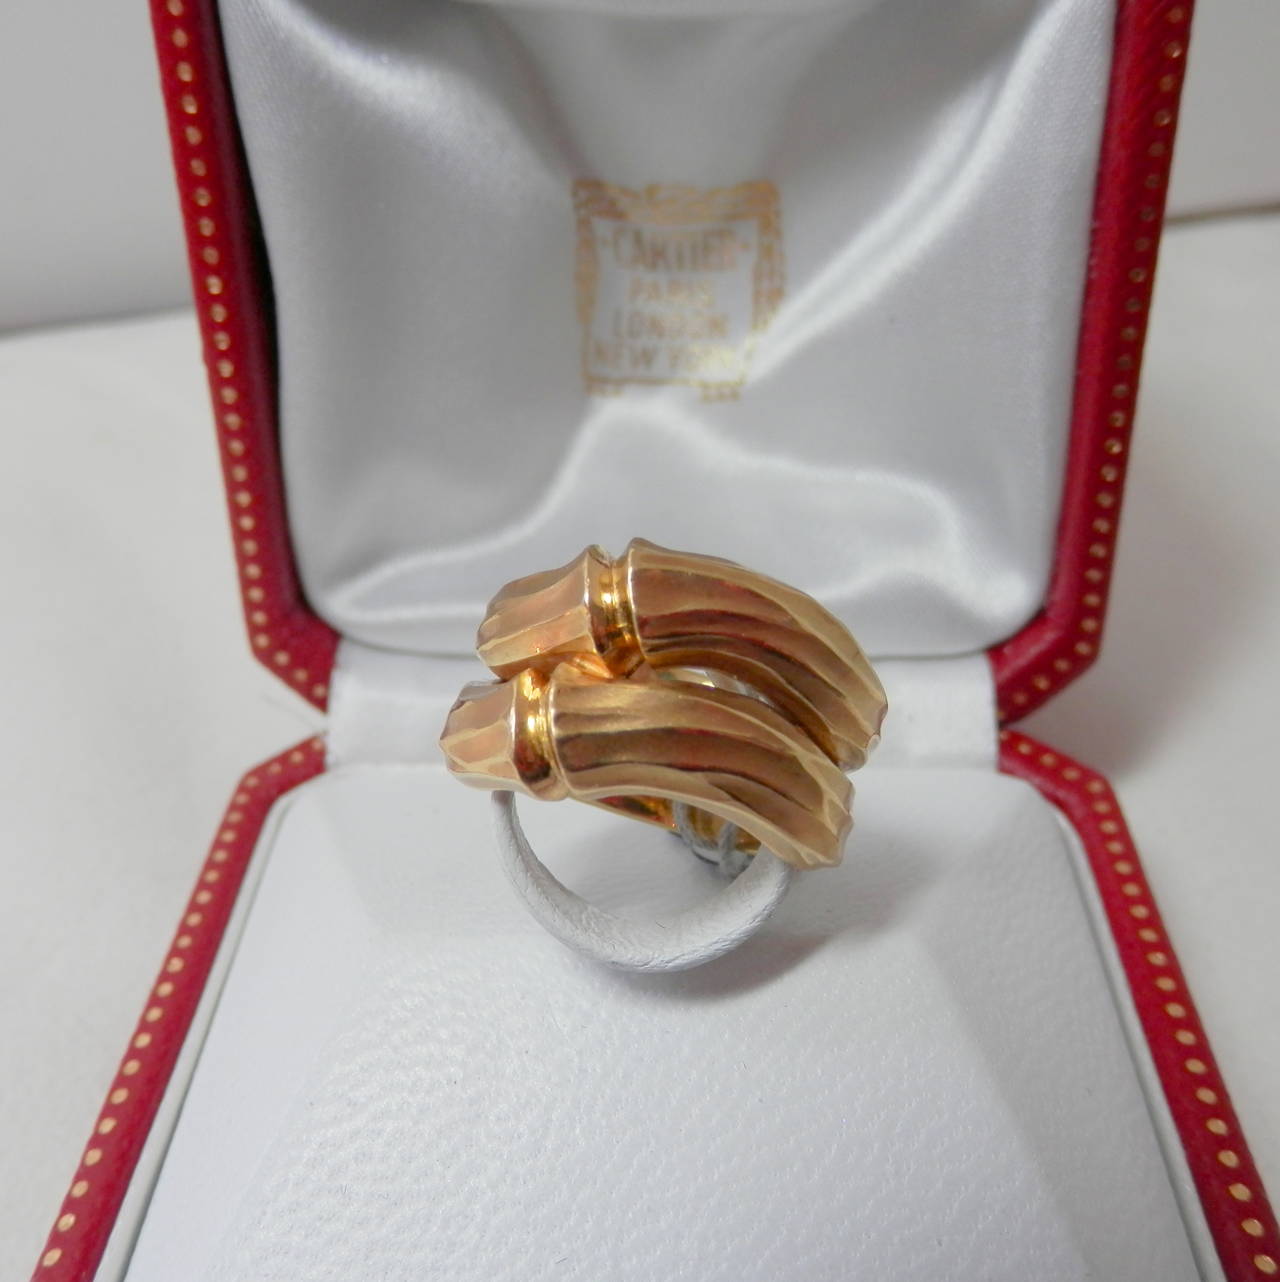 Cartier's bamboo 18K ring, made in France, No. 758821. Now a size 5.5 and can be sized.